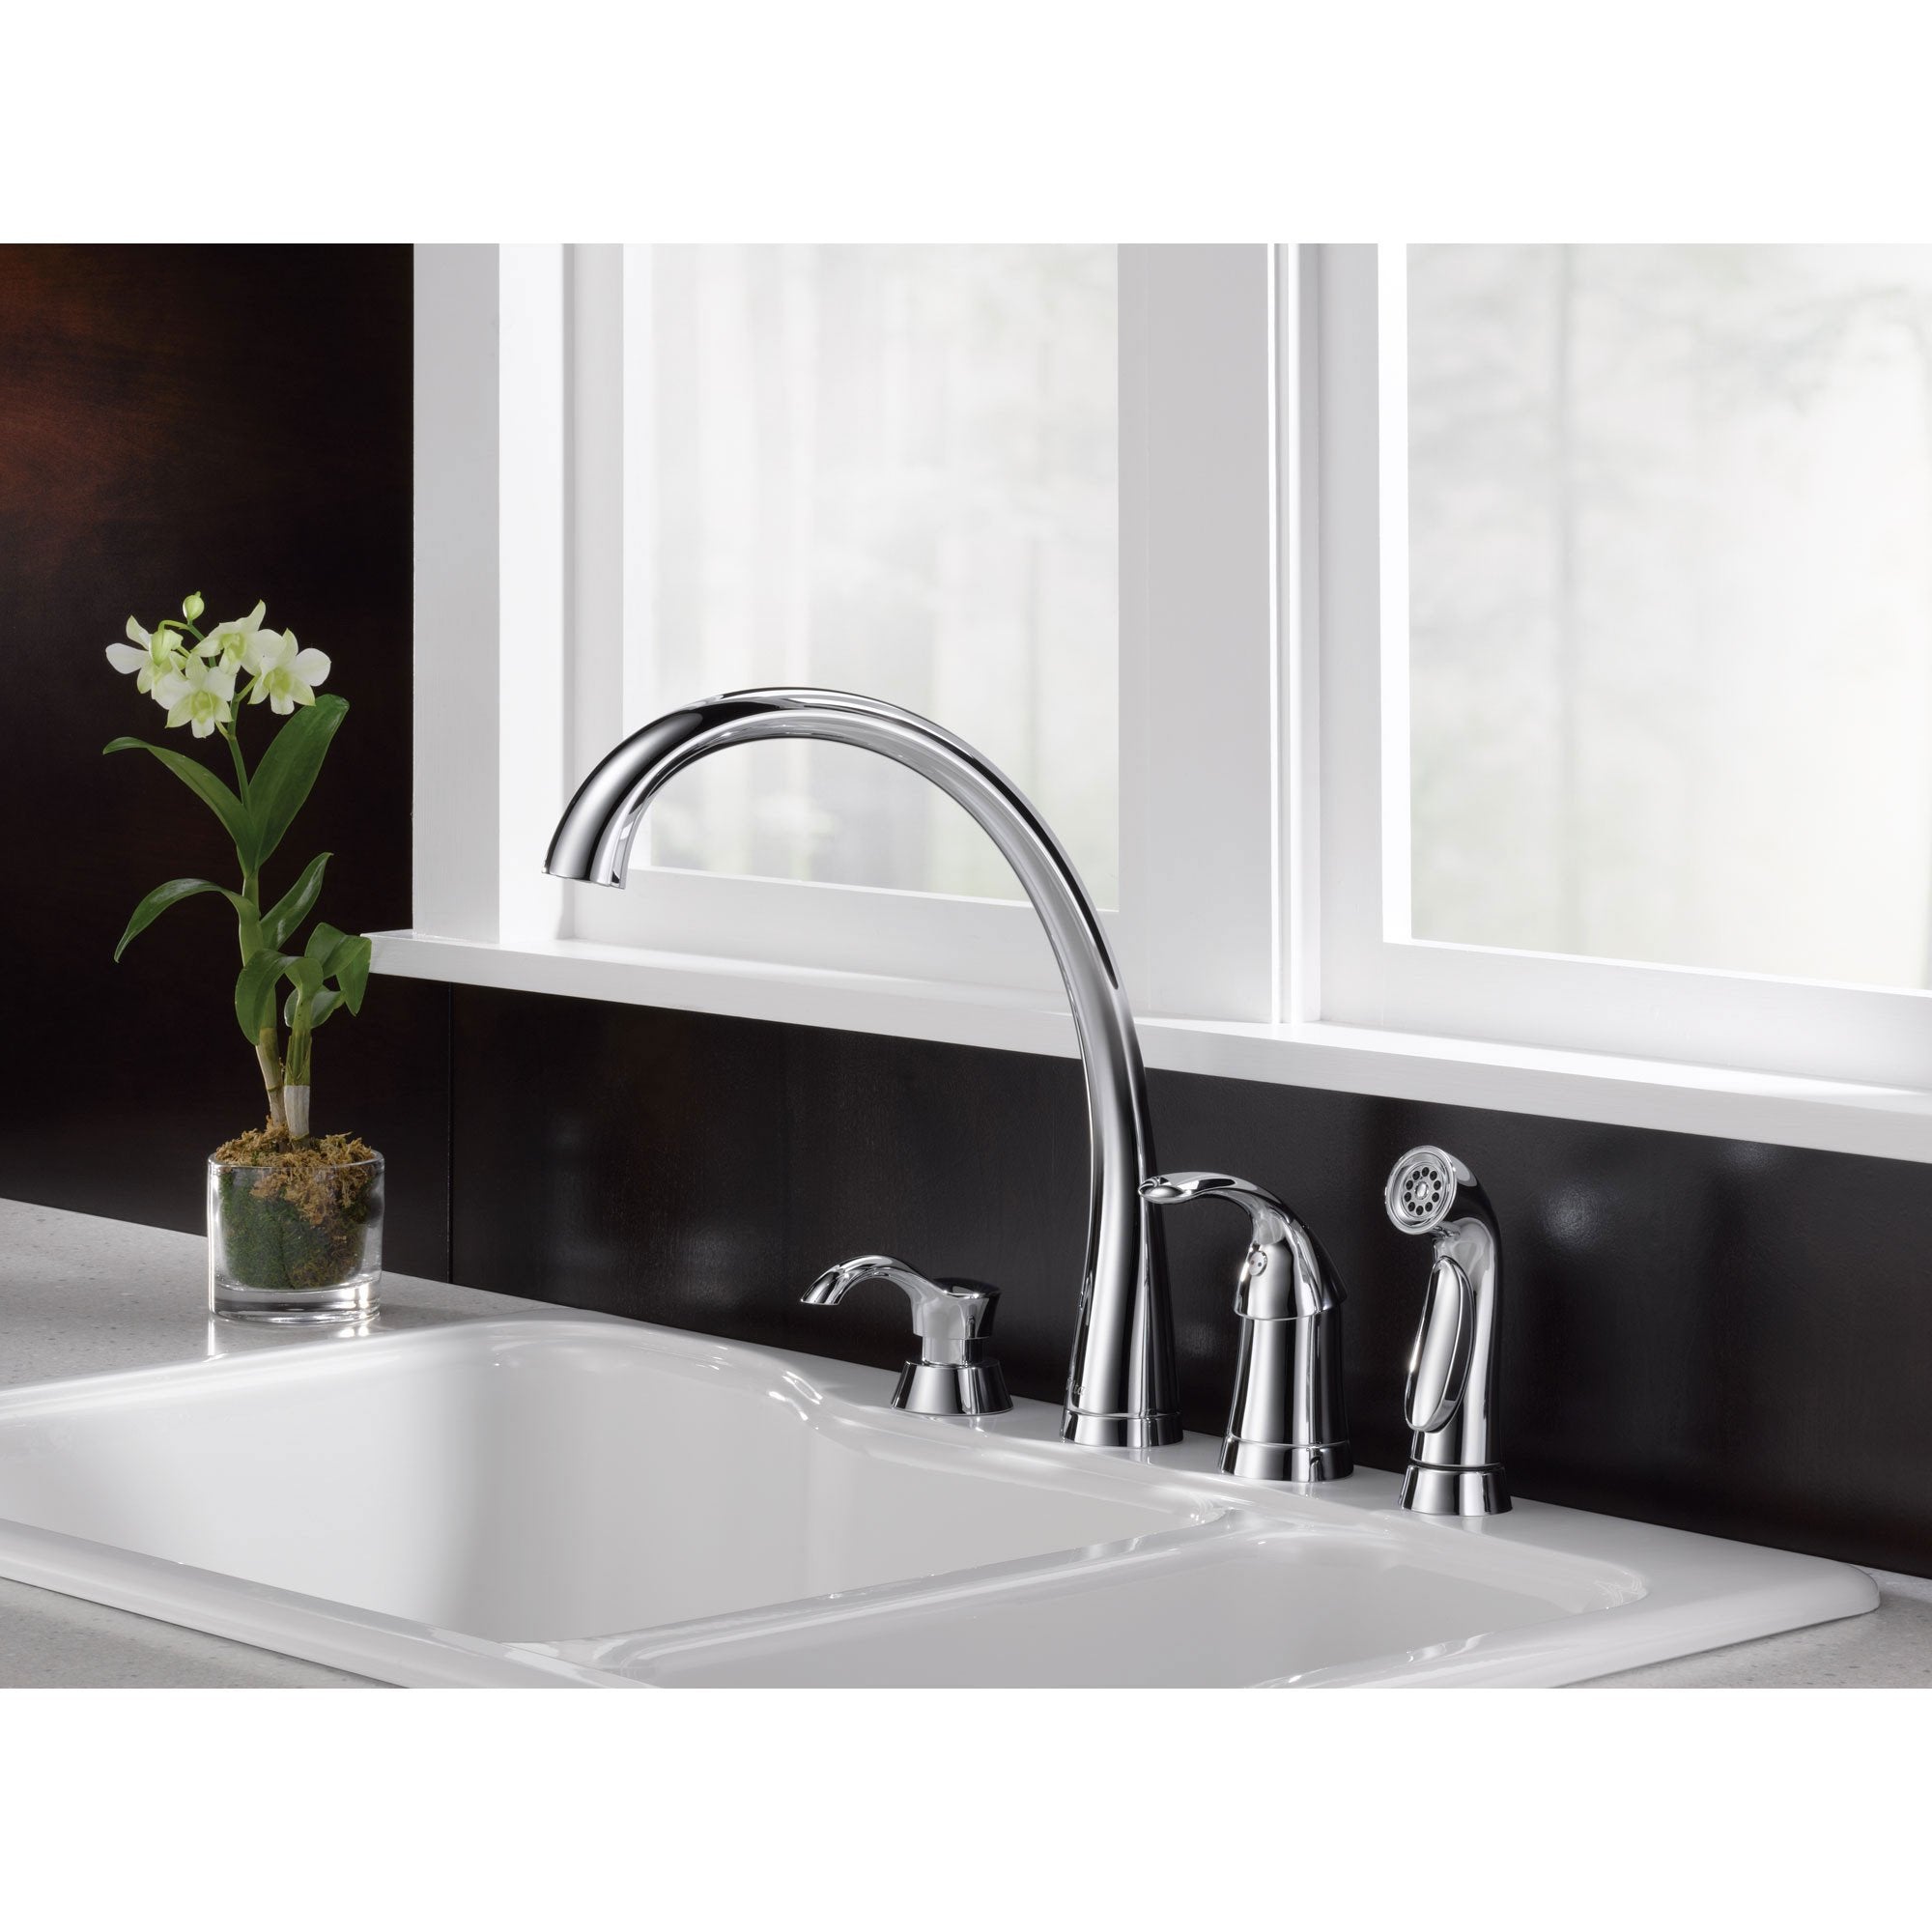 Delta Chrome Finish Pilar Modern Single Handle Kitchen Sink Faucet with Side Spray and Deck Mount Soap Dispenser Package D067CR